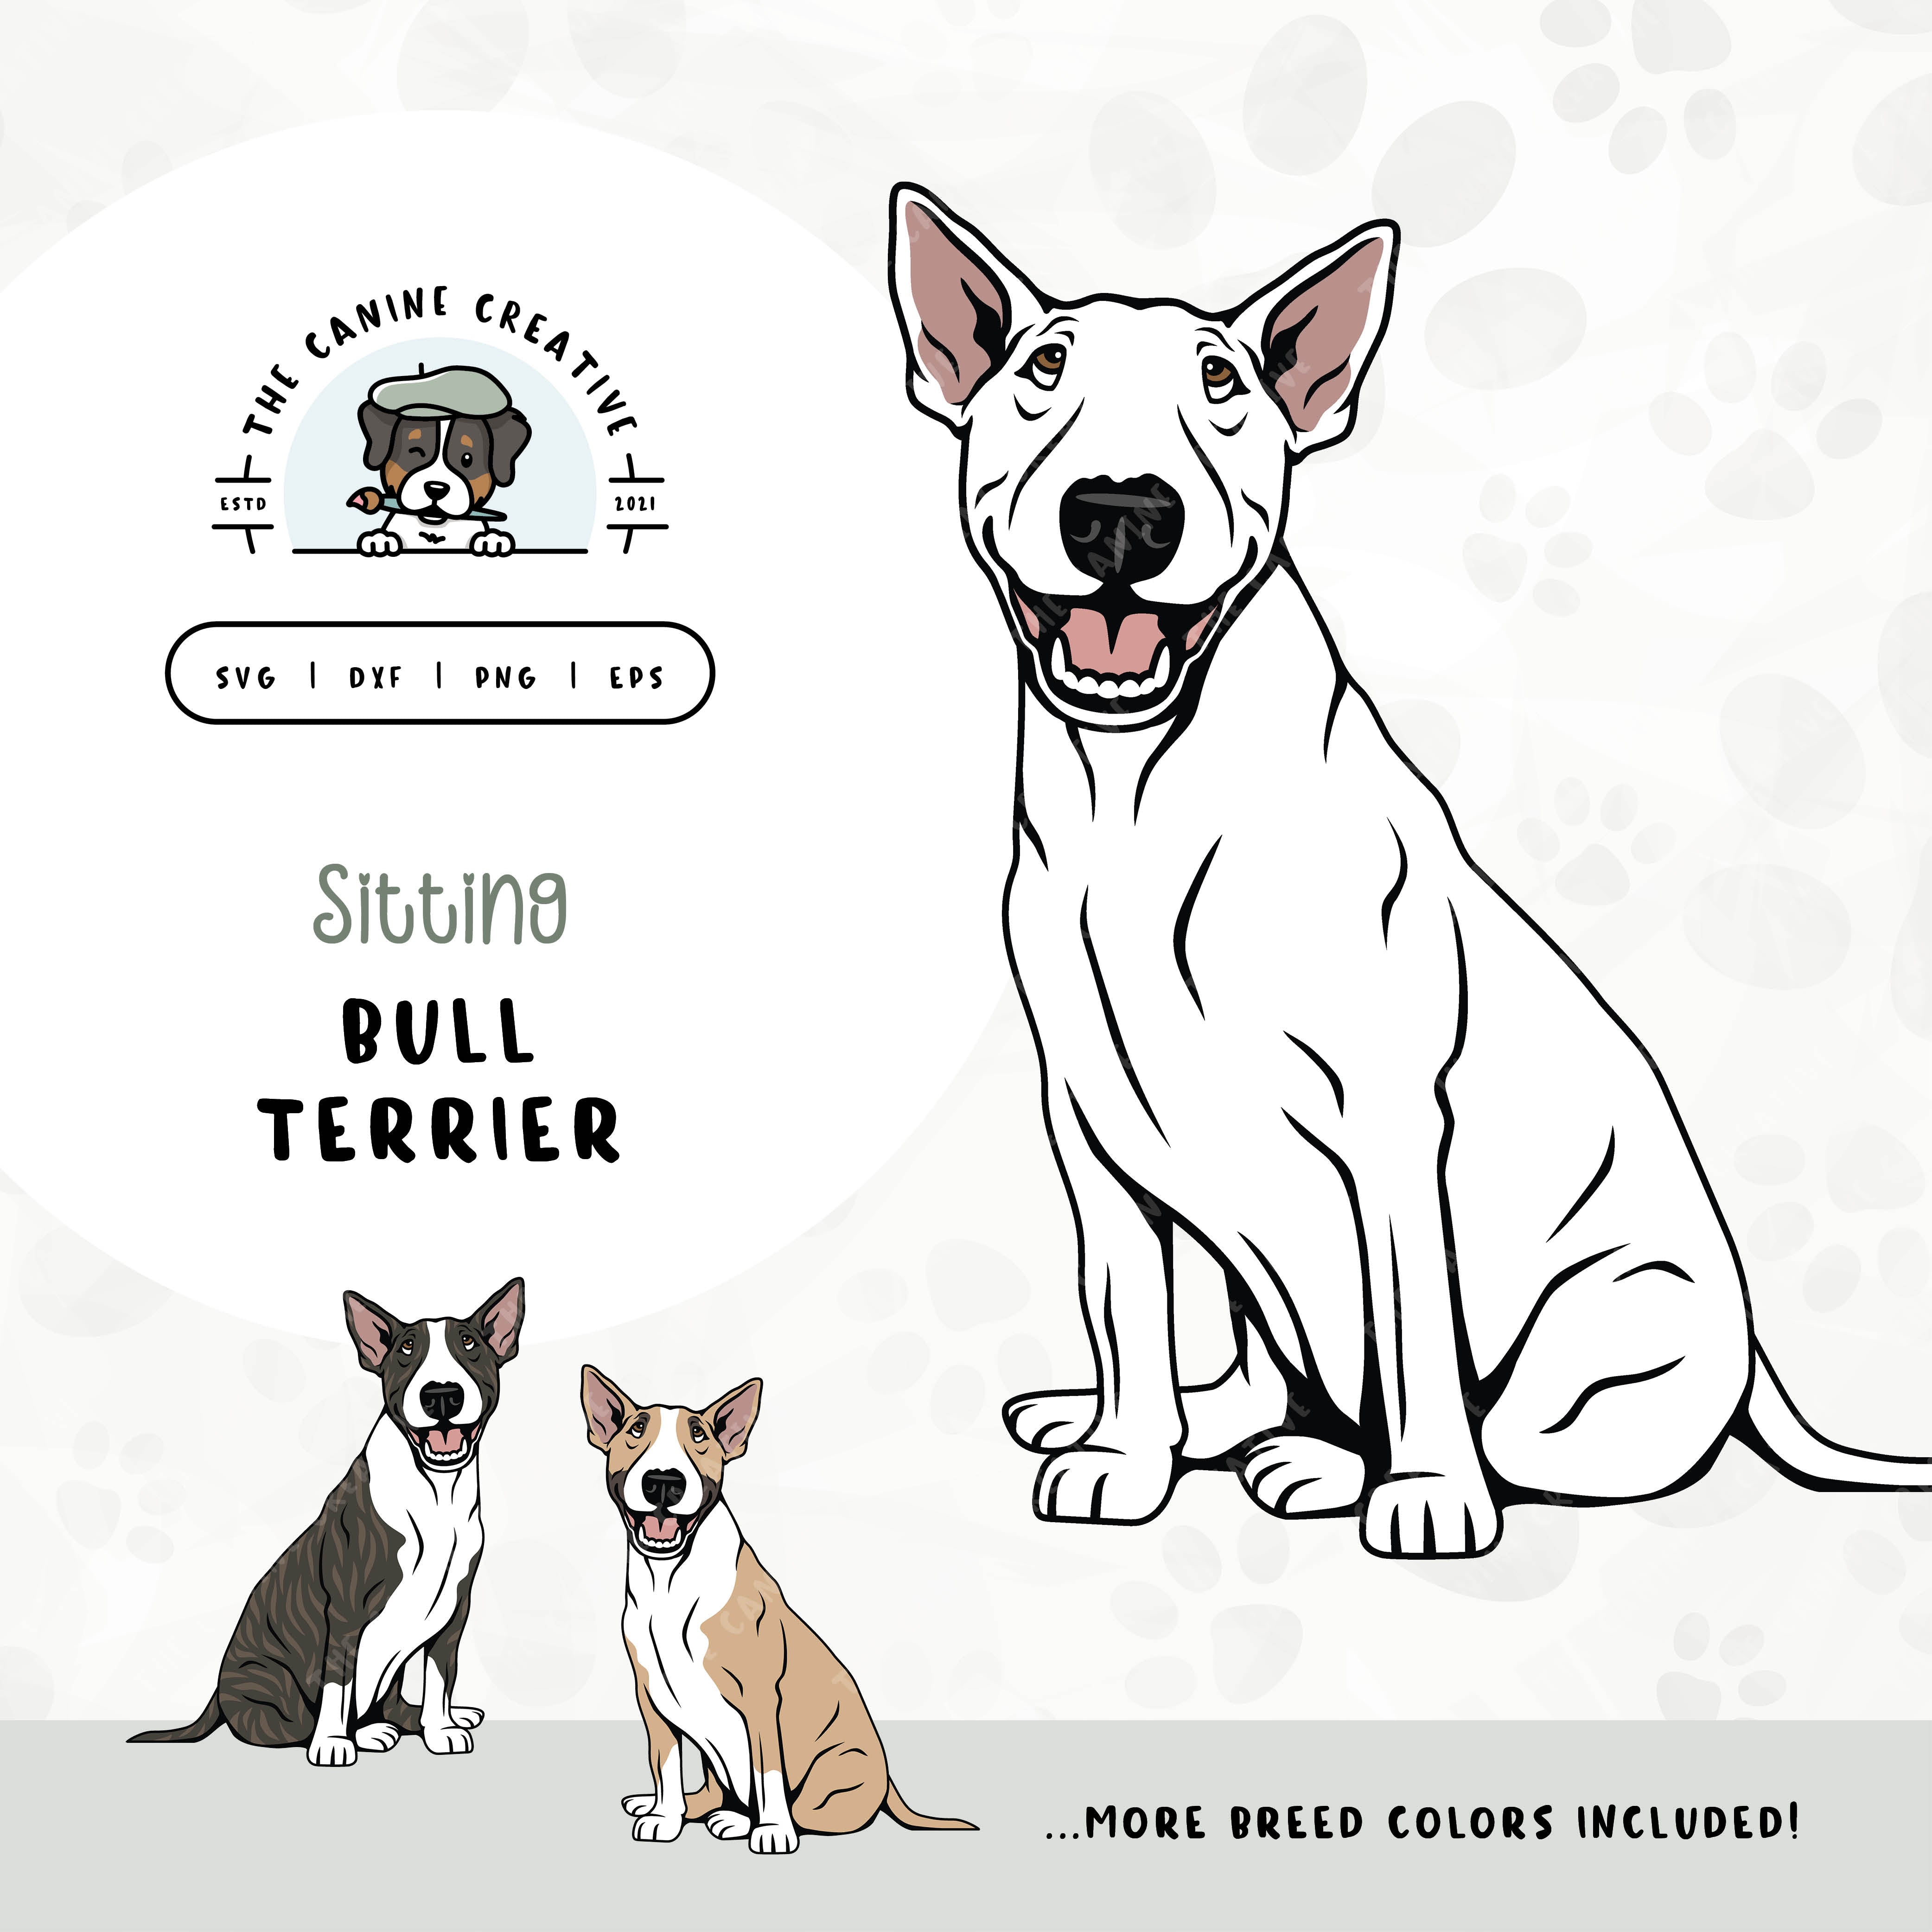 This sitting dog design features a Bully Terrier. File formats include: SVG, DXF, PNG, and EPS.